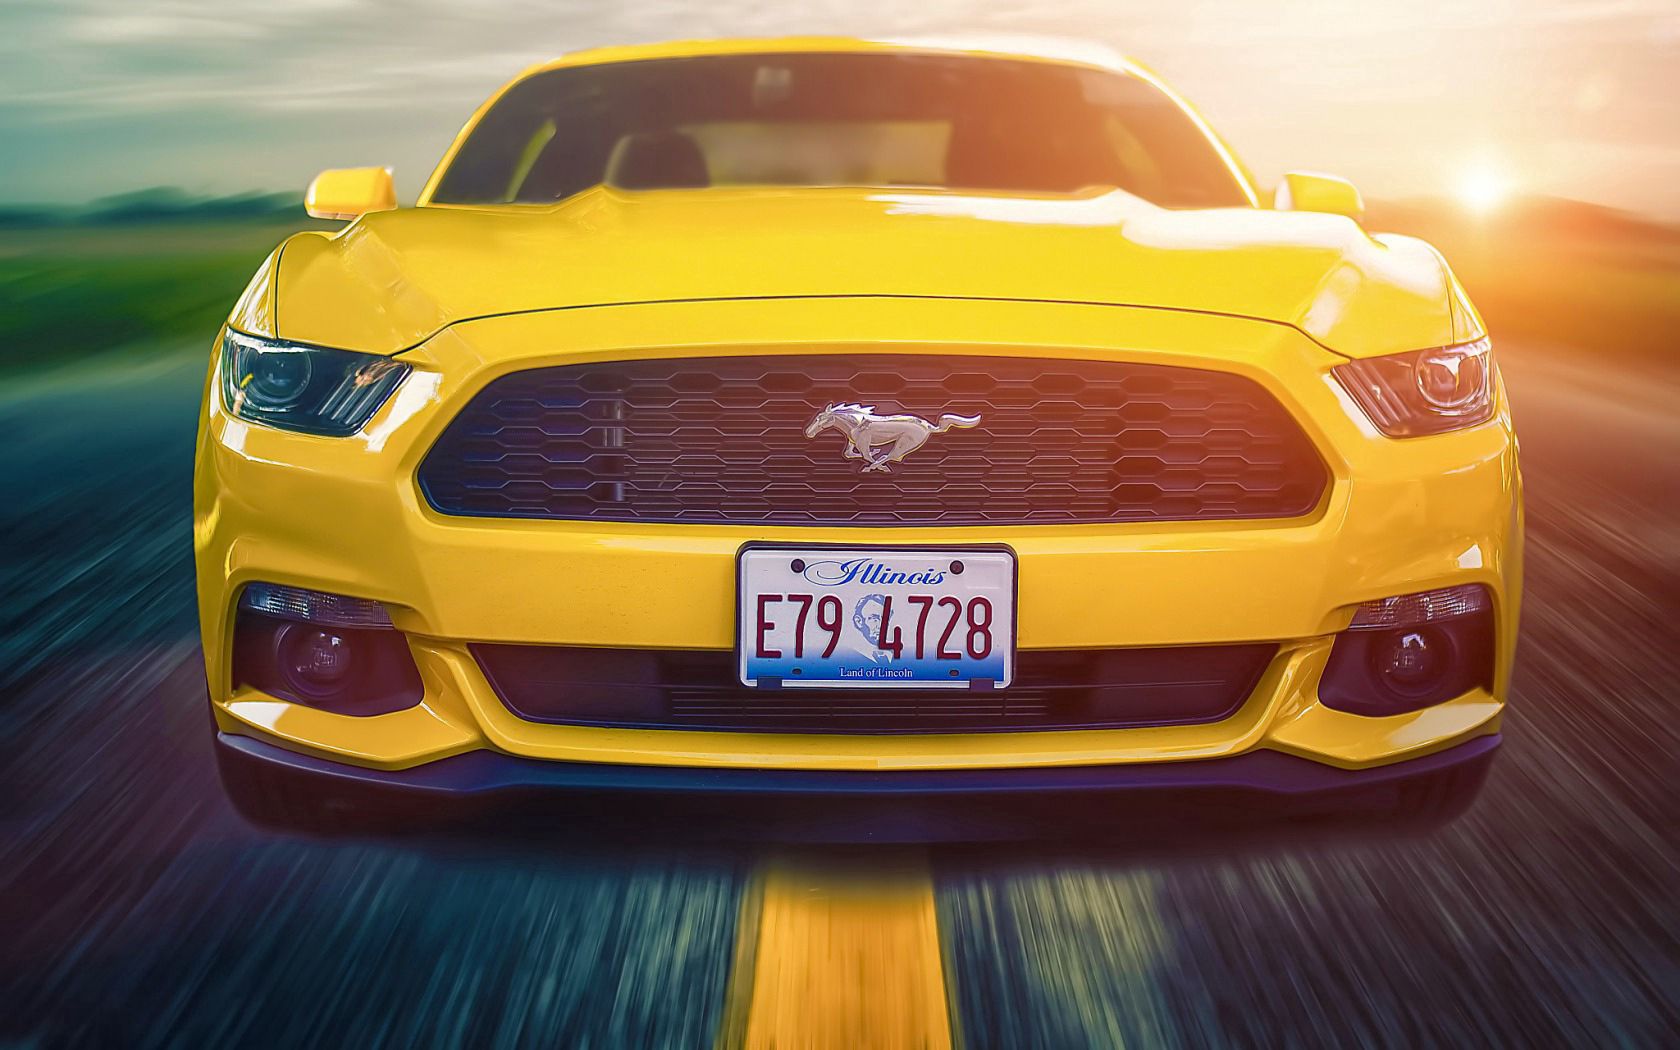 ford mustang, cars, yellow, front view, muscle car, 2015 2160p